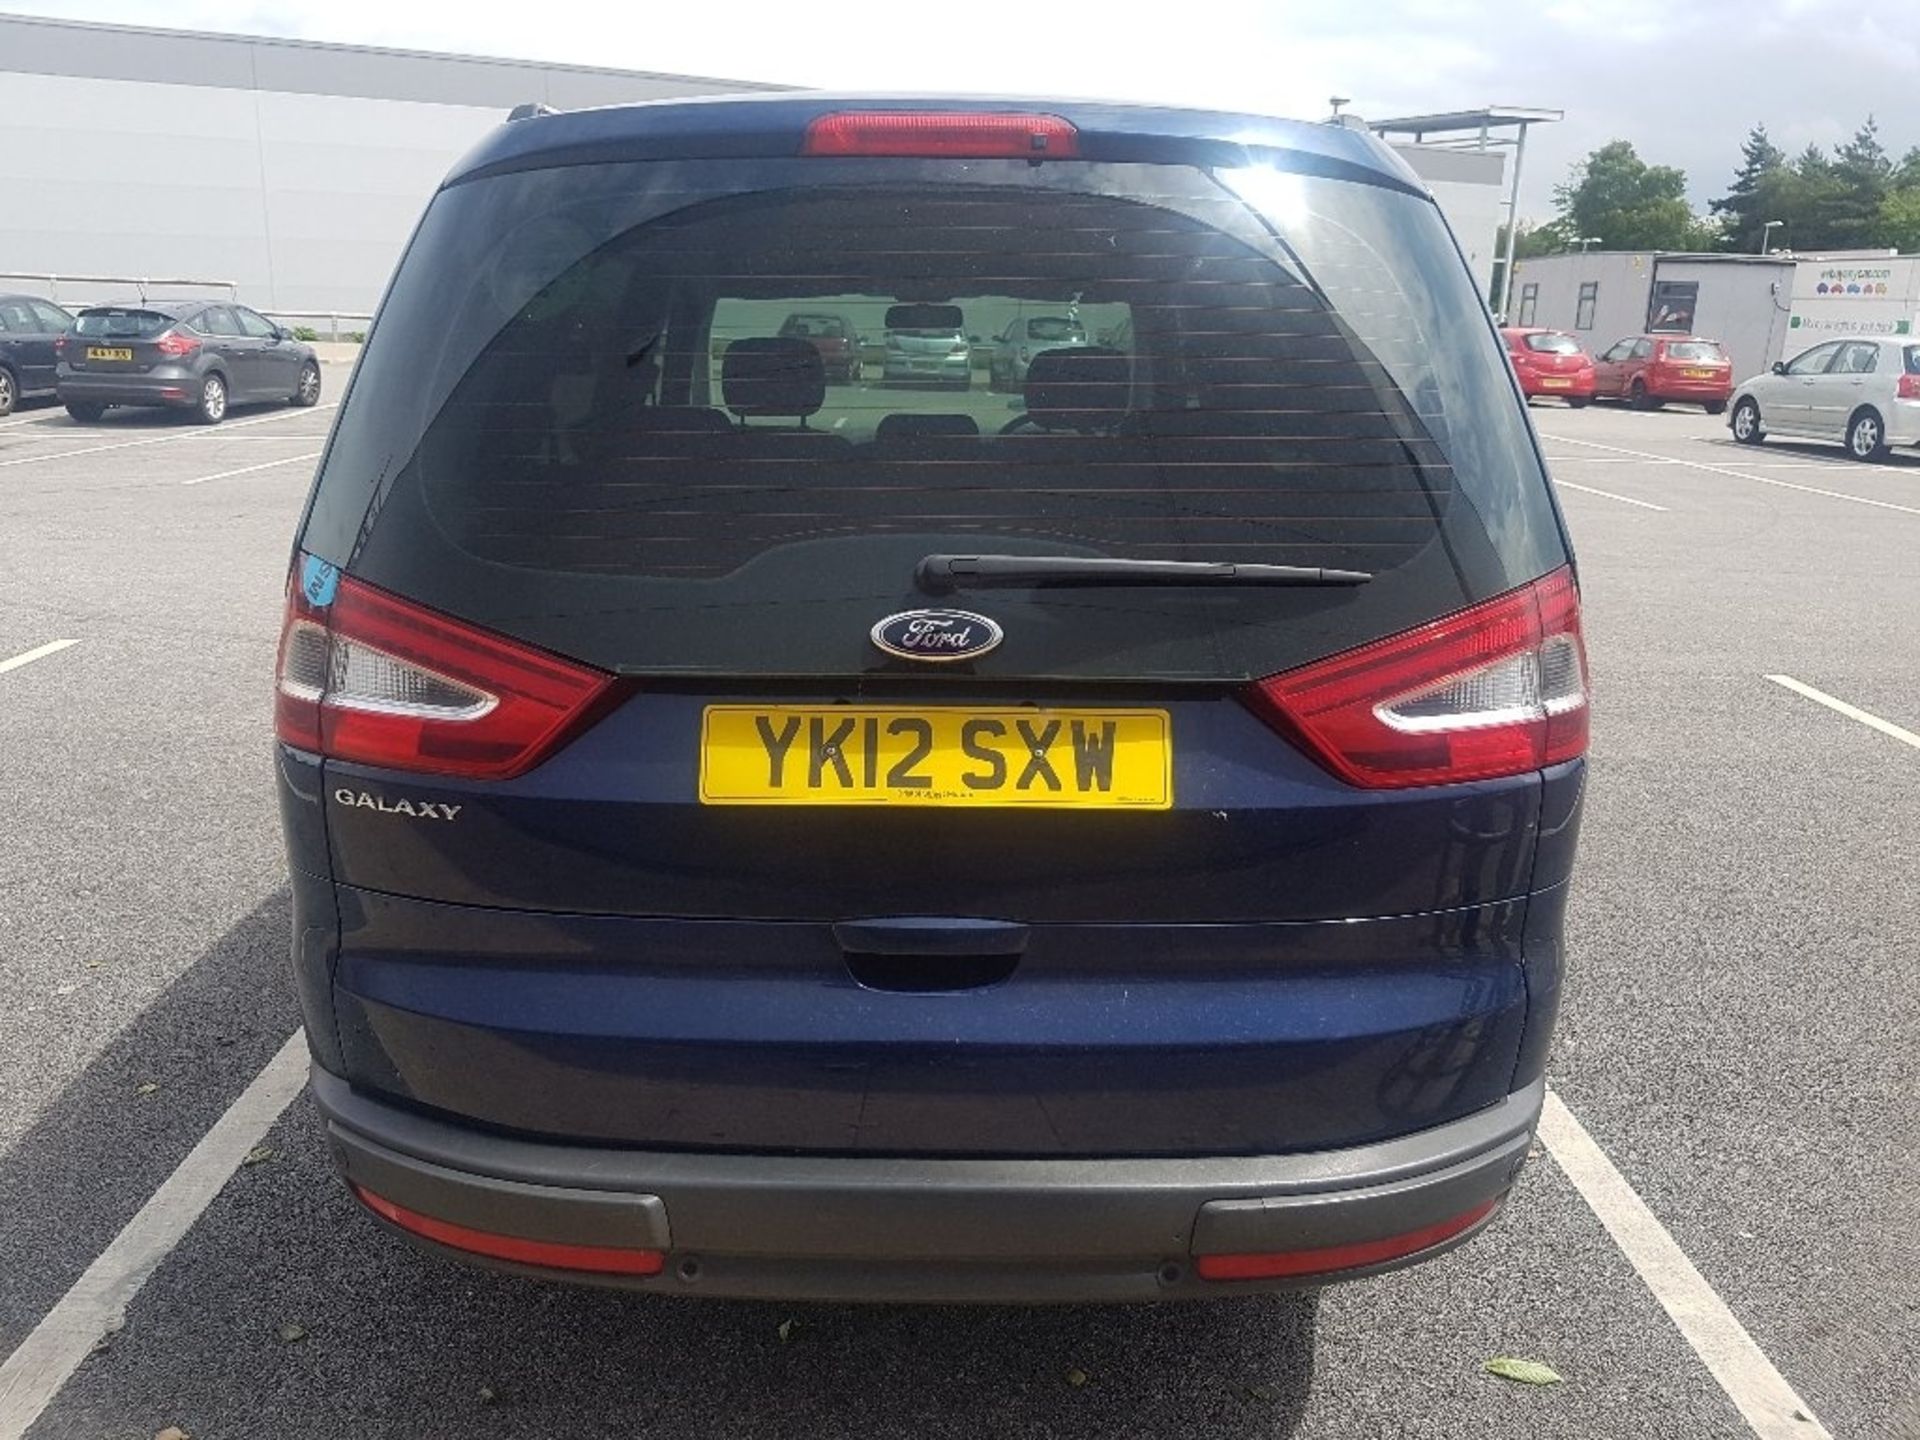 FORD GALAXY 2.0LTR TDCI ZETEC, DIESEL AUTO, 5 DOOR, DATE OF FIRST REGISTRATION: 15-05-2012, - Image 2 of 17